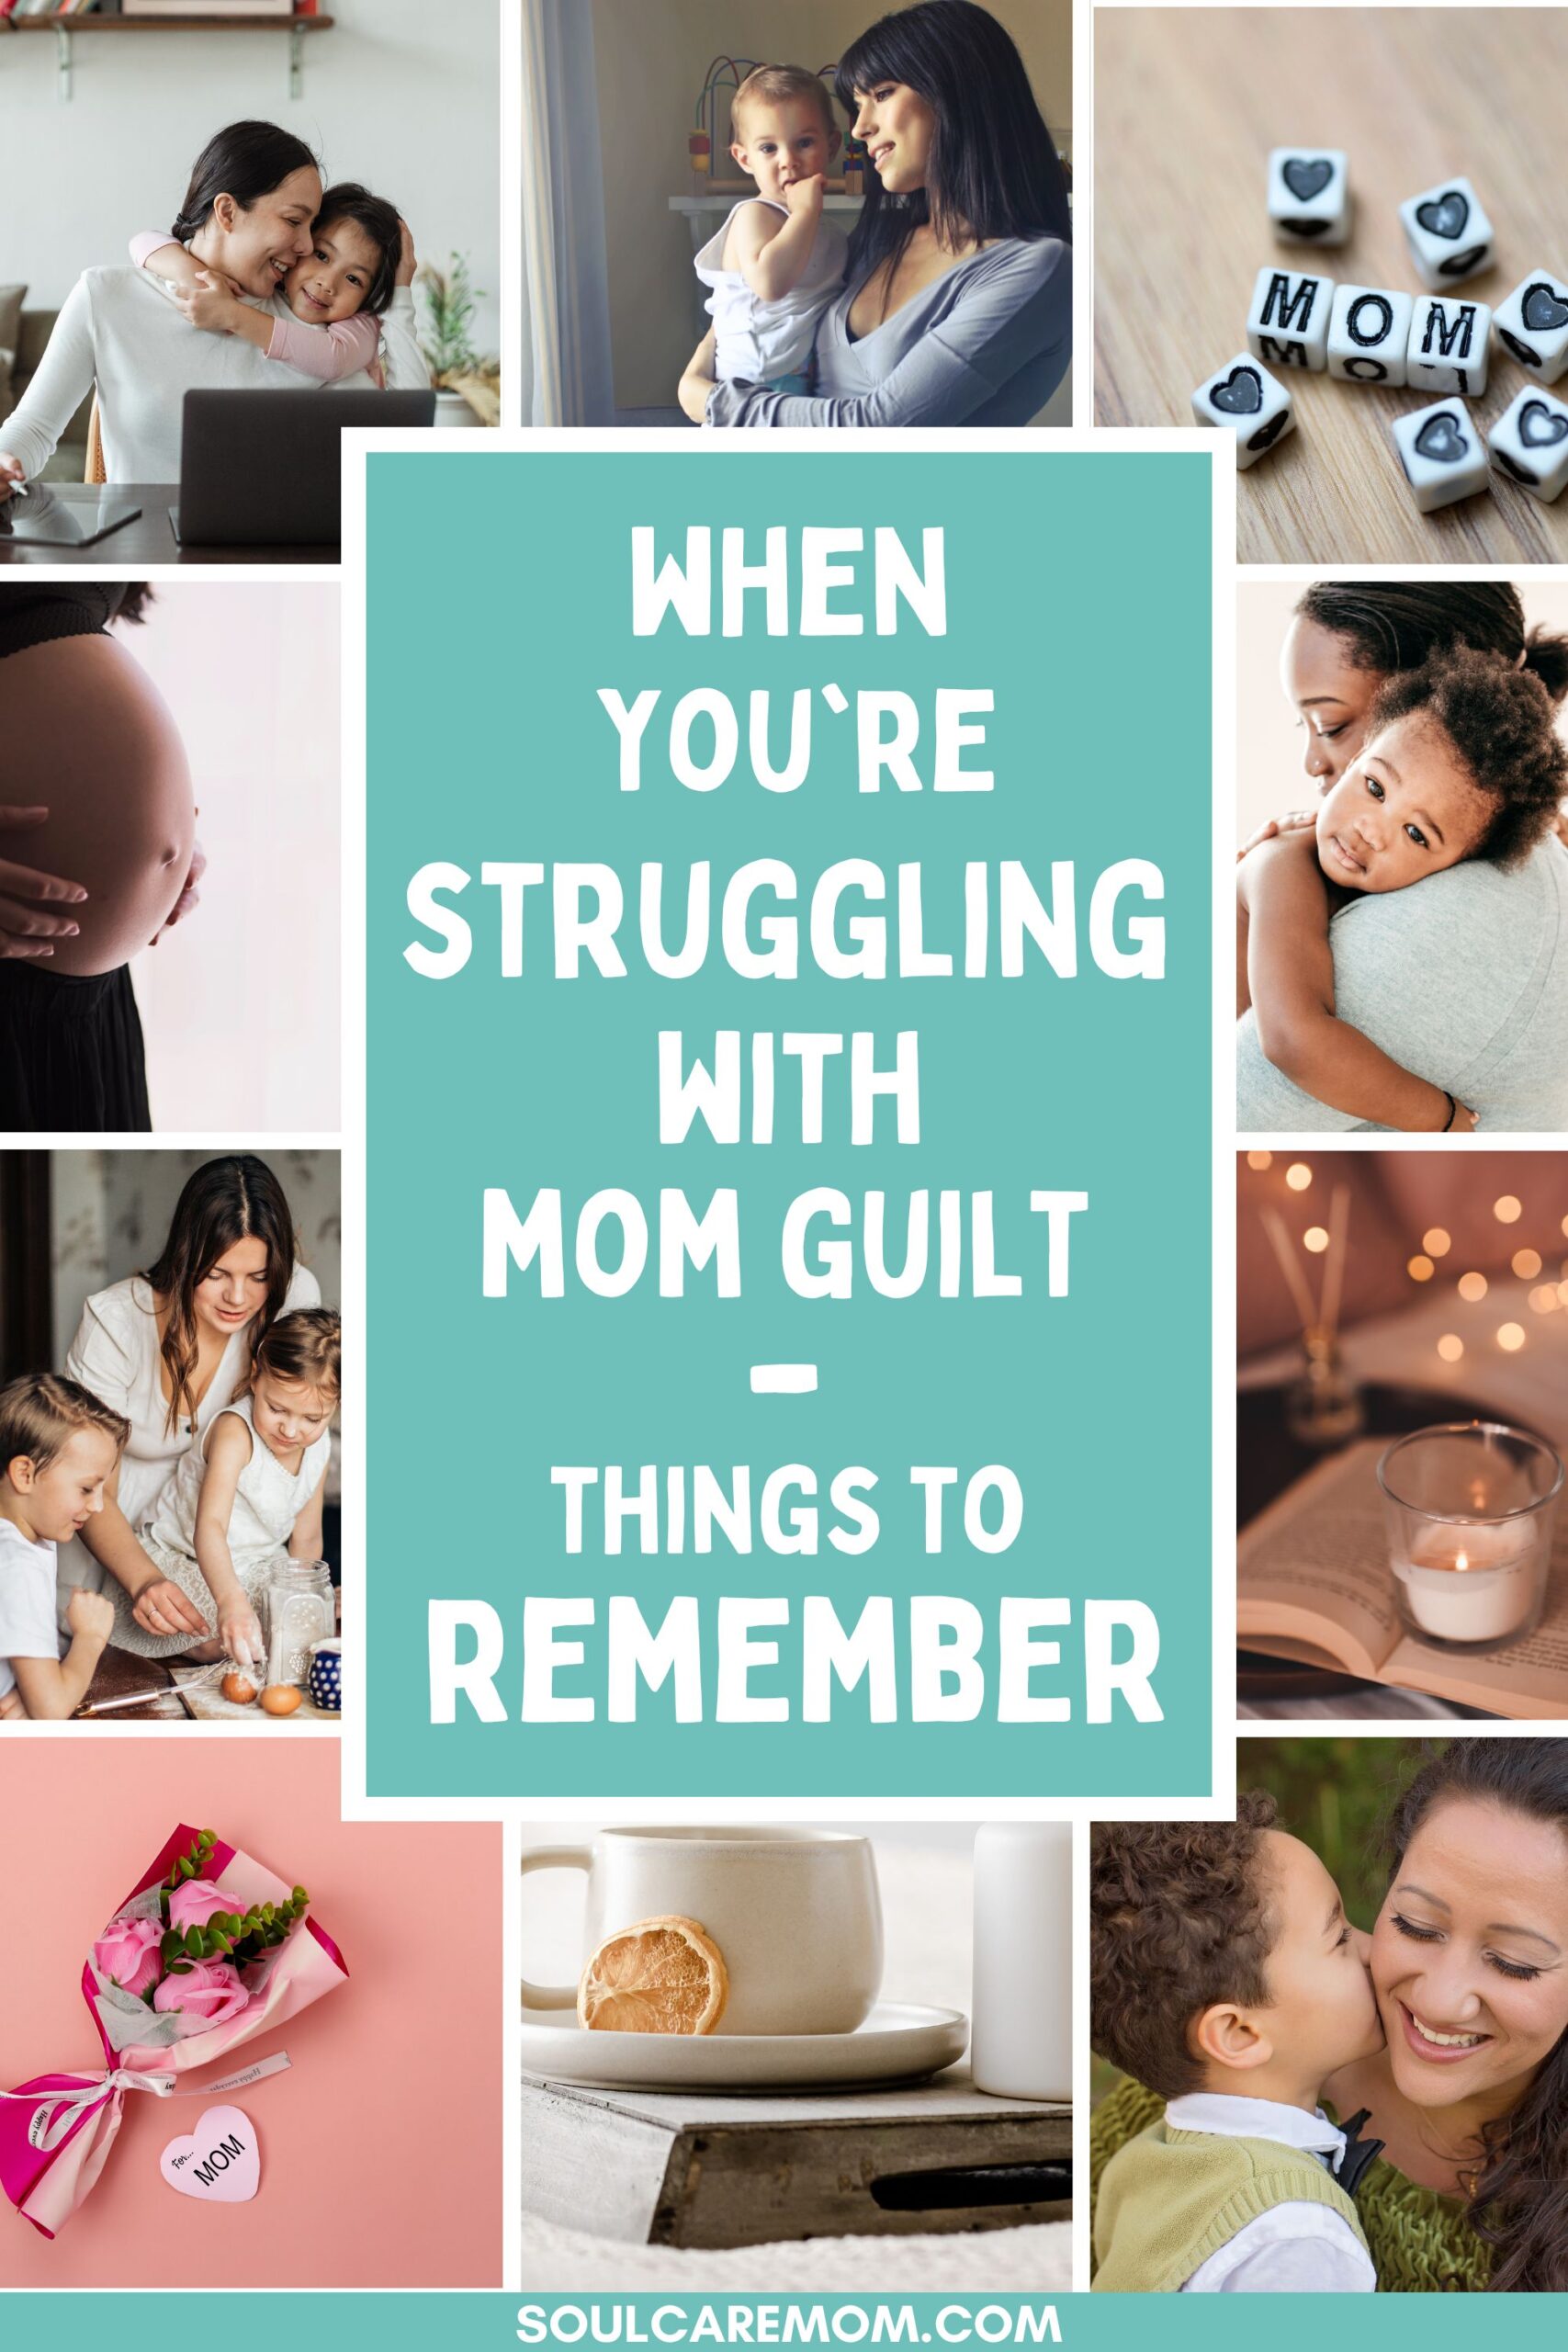 When you're struggling with mom guilt - things to remember